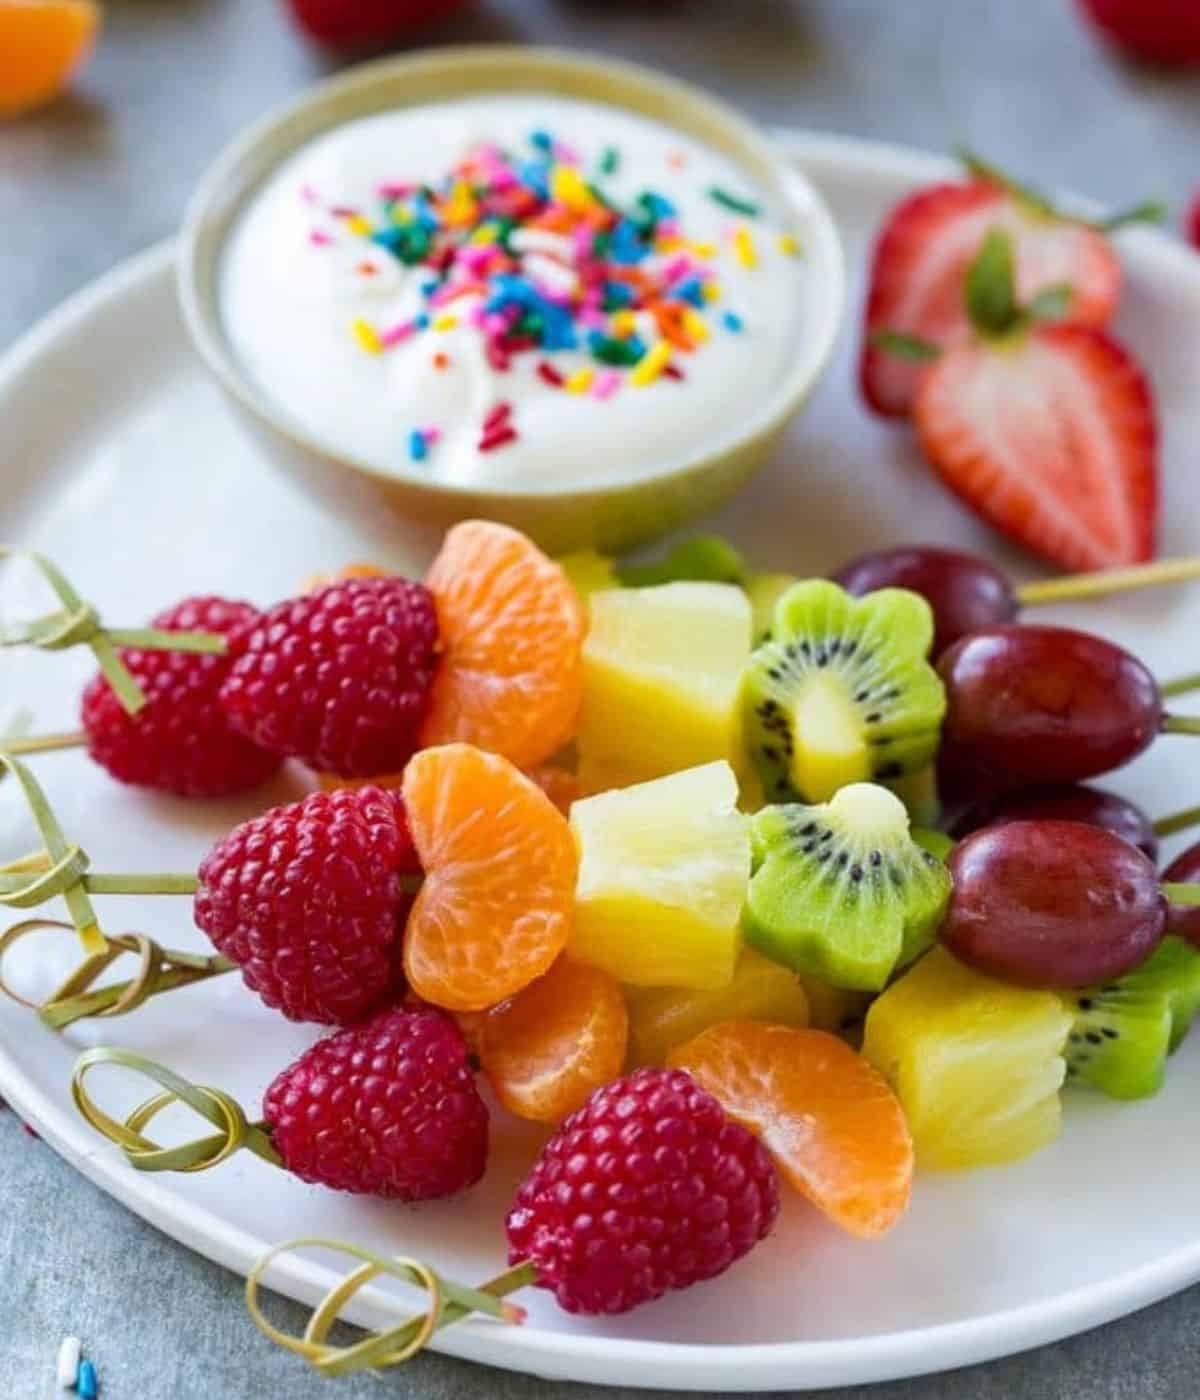 Raspberry, satsuma, pineapple, kiwi and grape on a kebab stick, on a plate with a dip with sprinkles and cut strawberry.